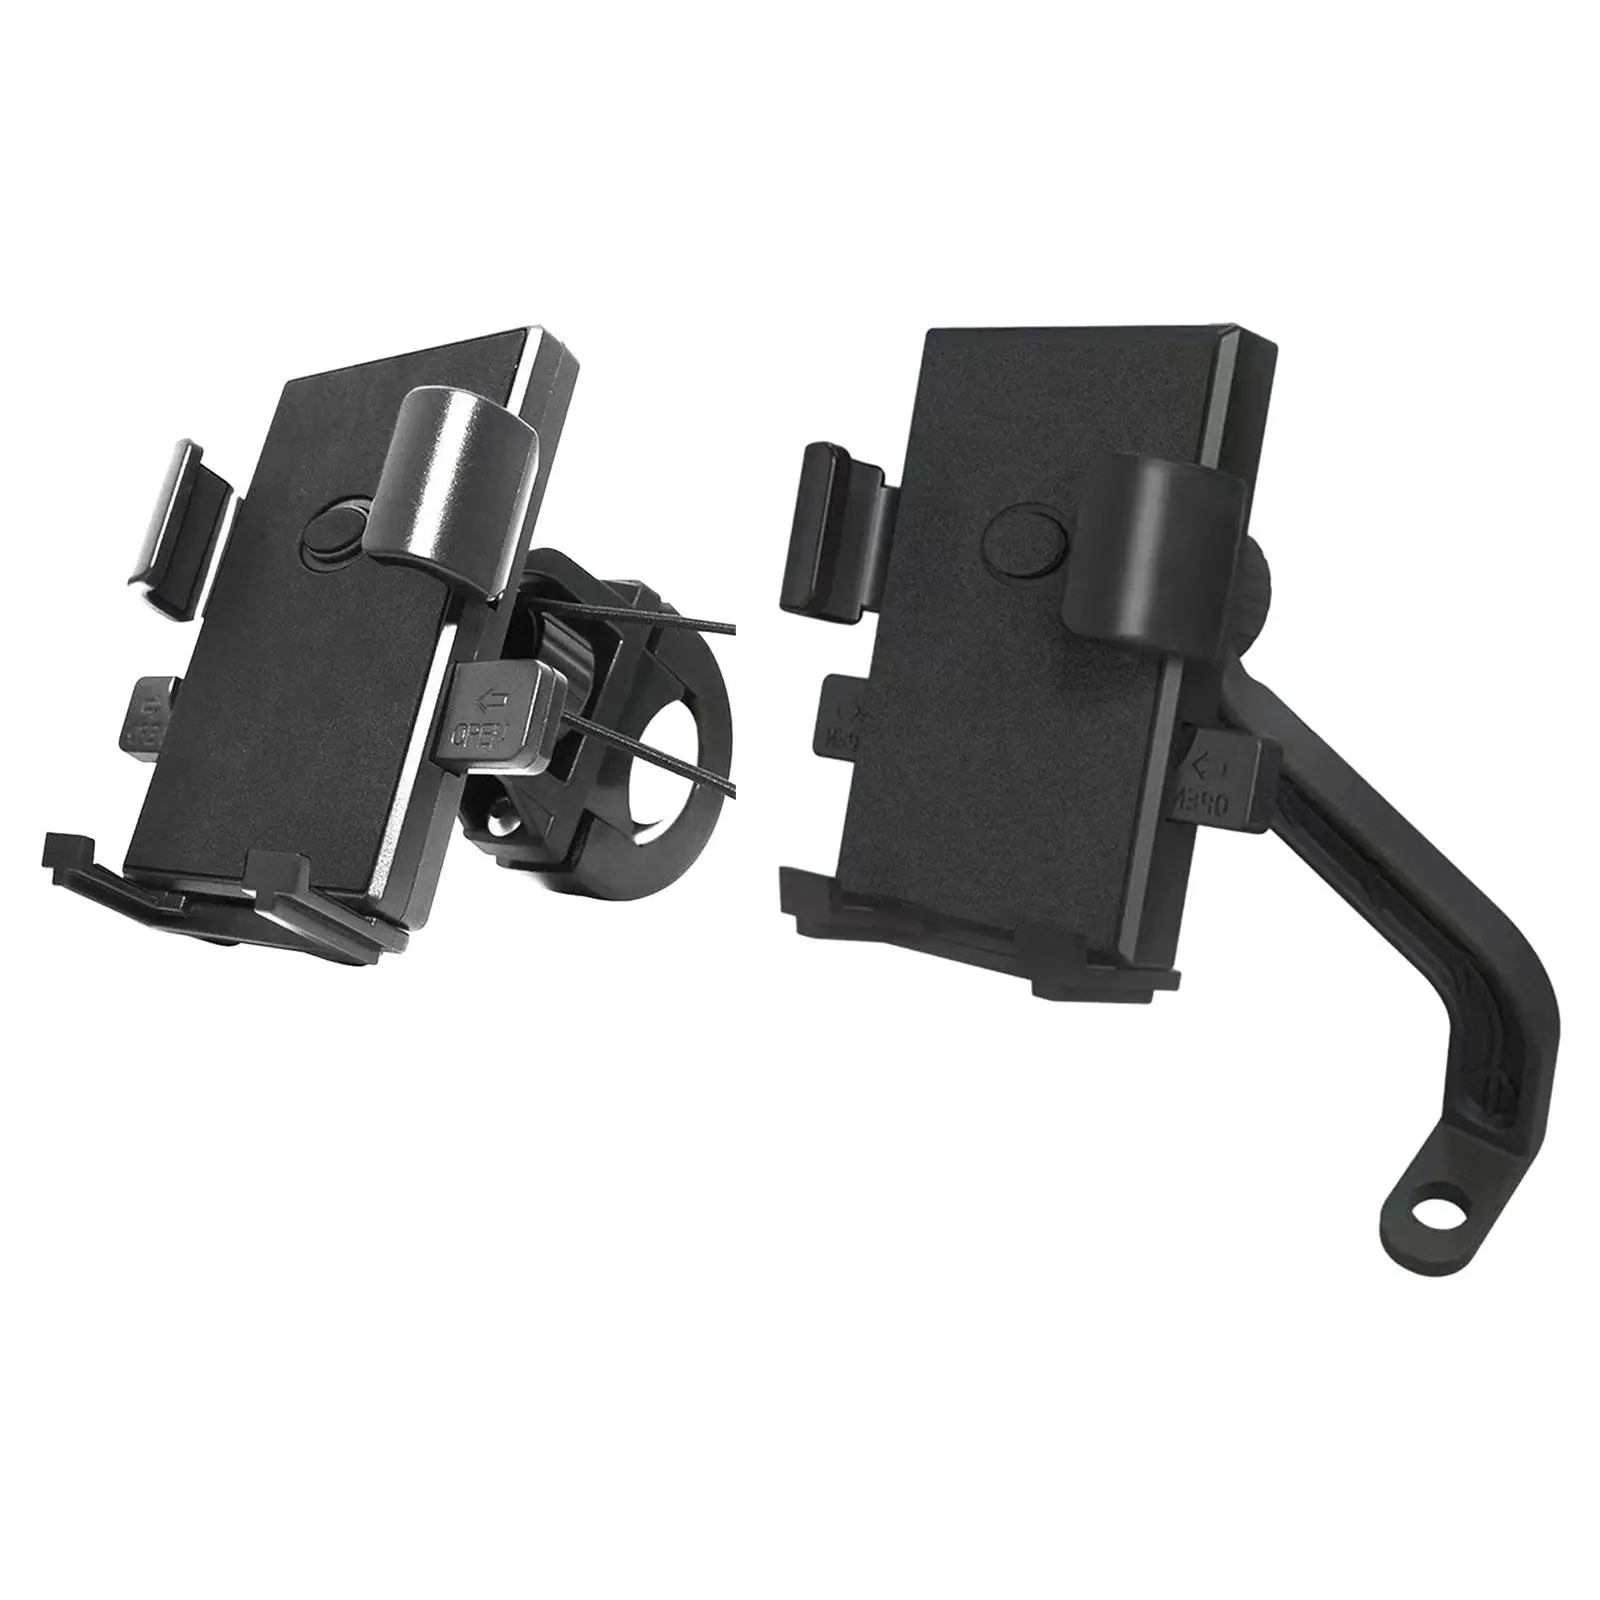 

Bicycle Phone Mount Bike Phone Holder Support Adjustable Shockproof Waterproof for 4.0-6.5inch Riding Stand Cellphone Bracket